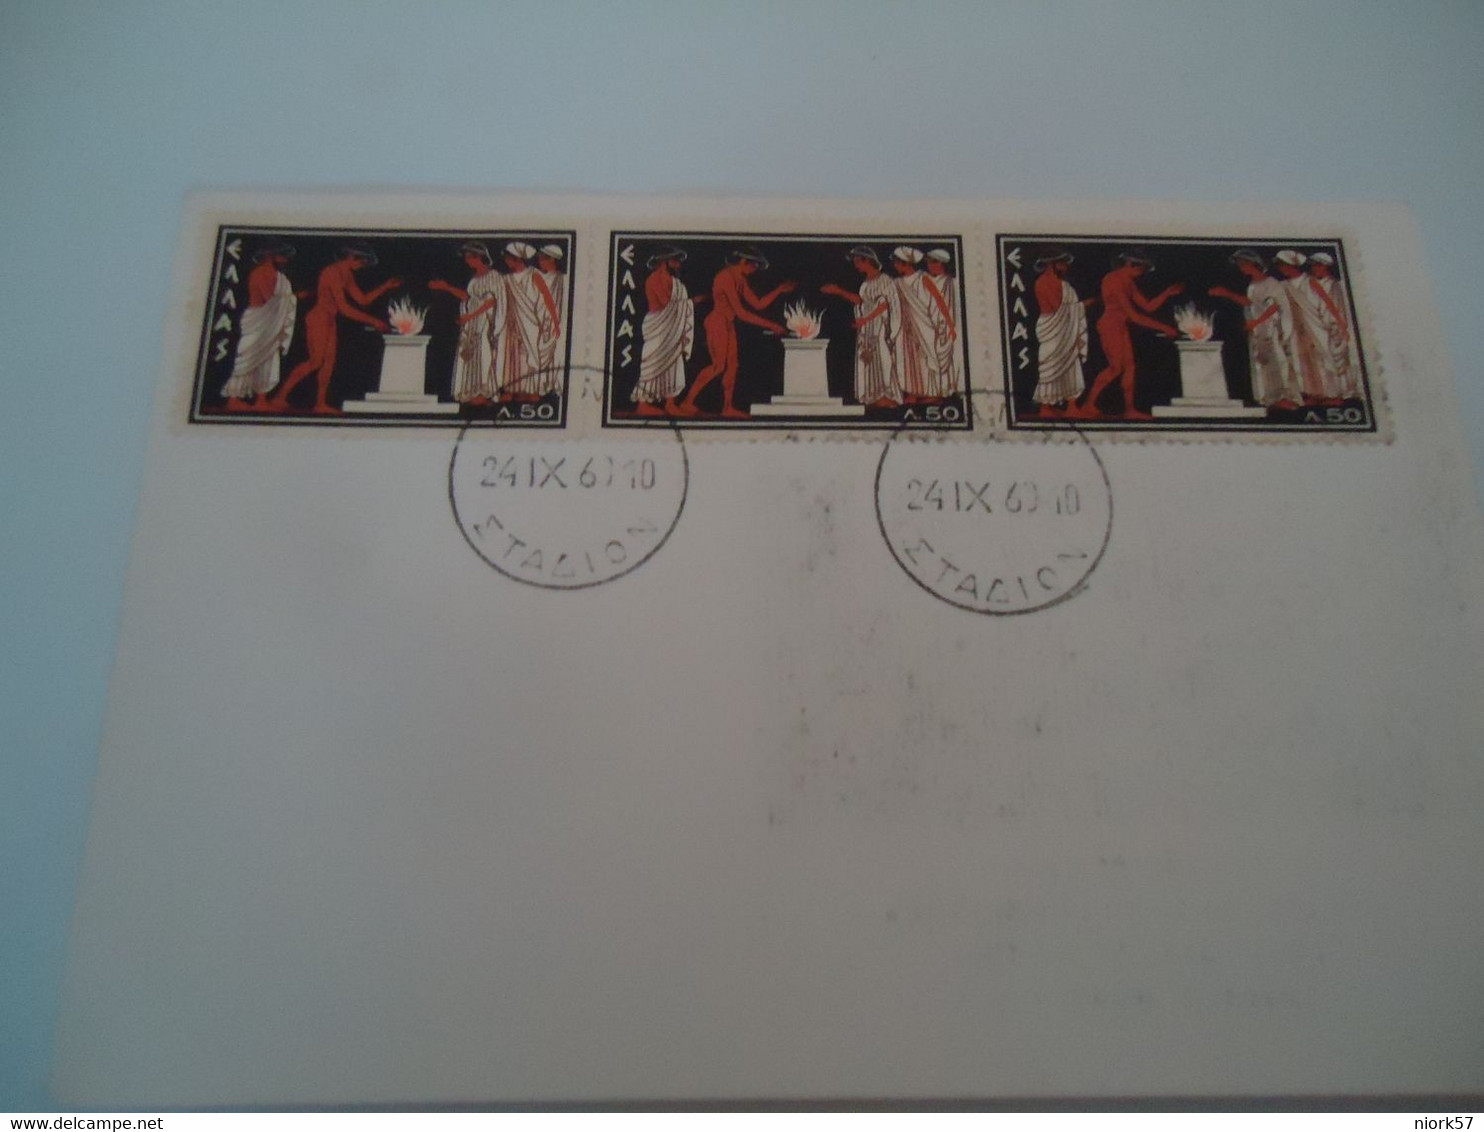 GREECE  POSTAL   CARDS  1960    STADIUM AT THE FIRST OLYMPIC  GAMES - Zomer 1896: Athene